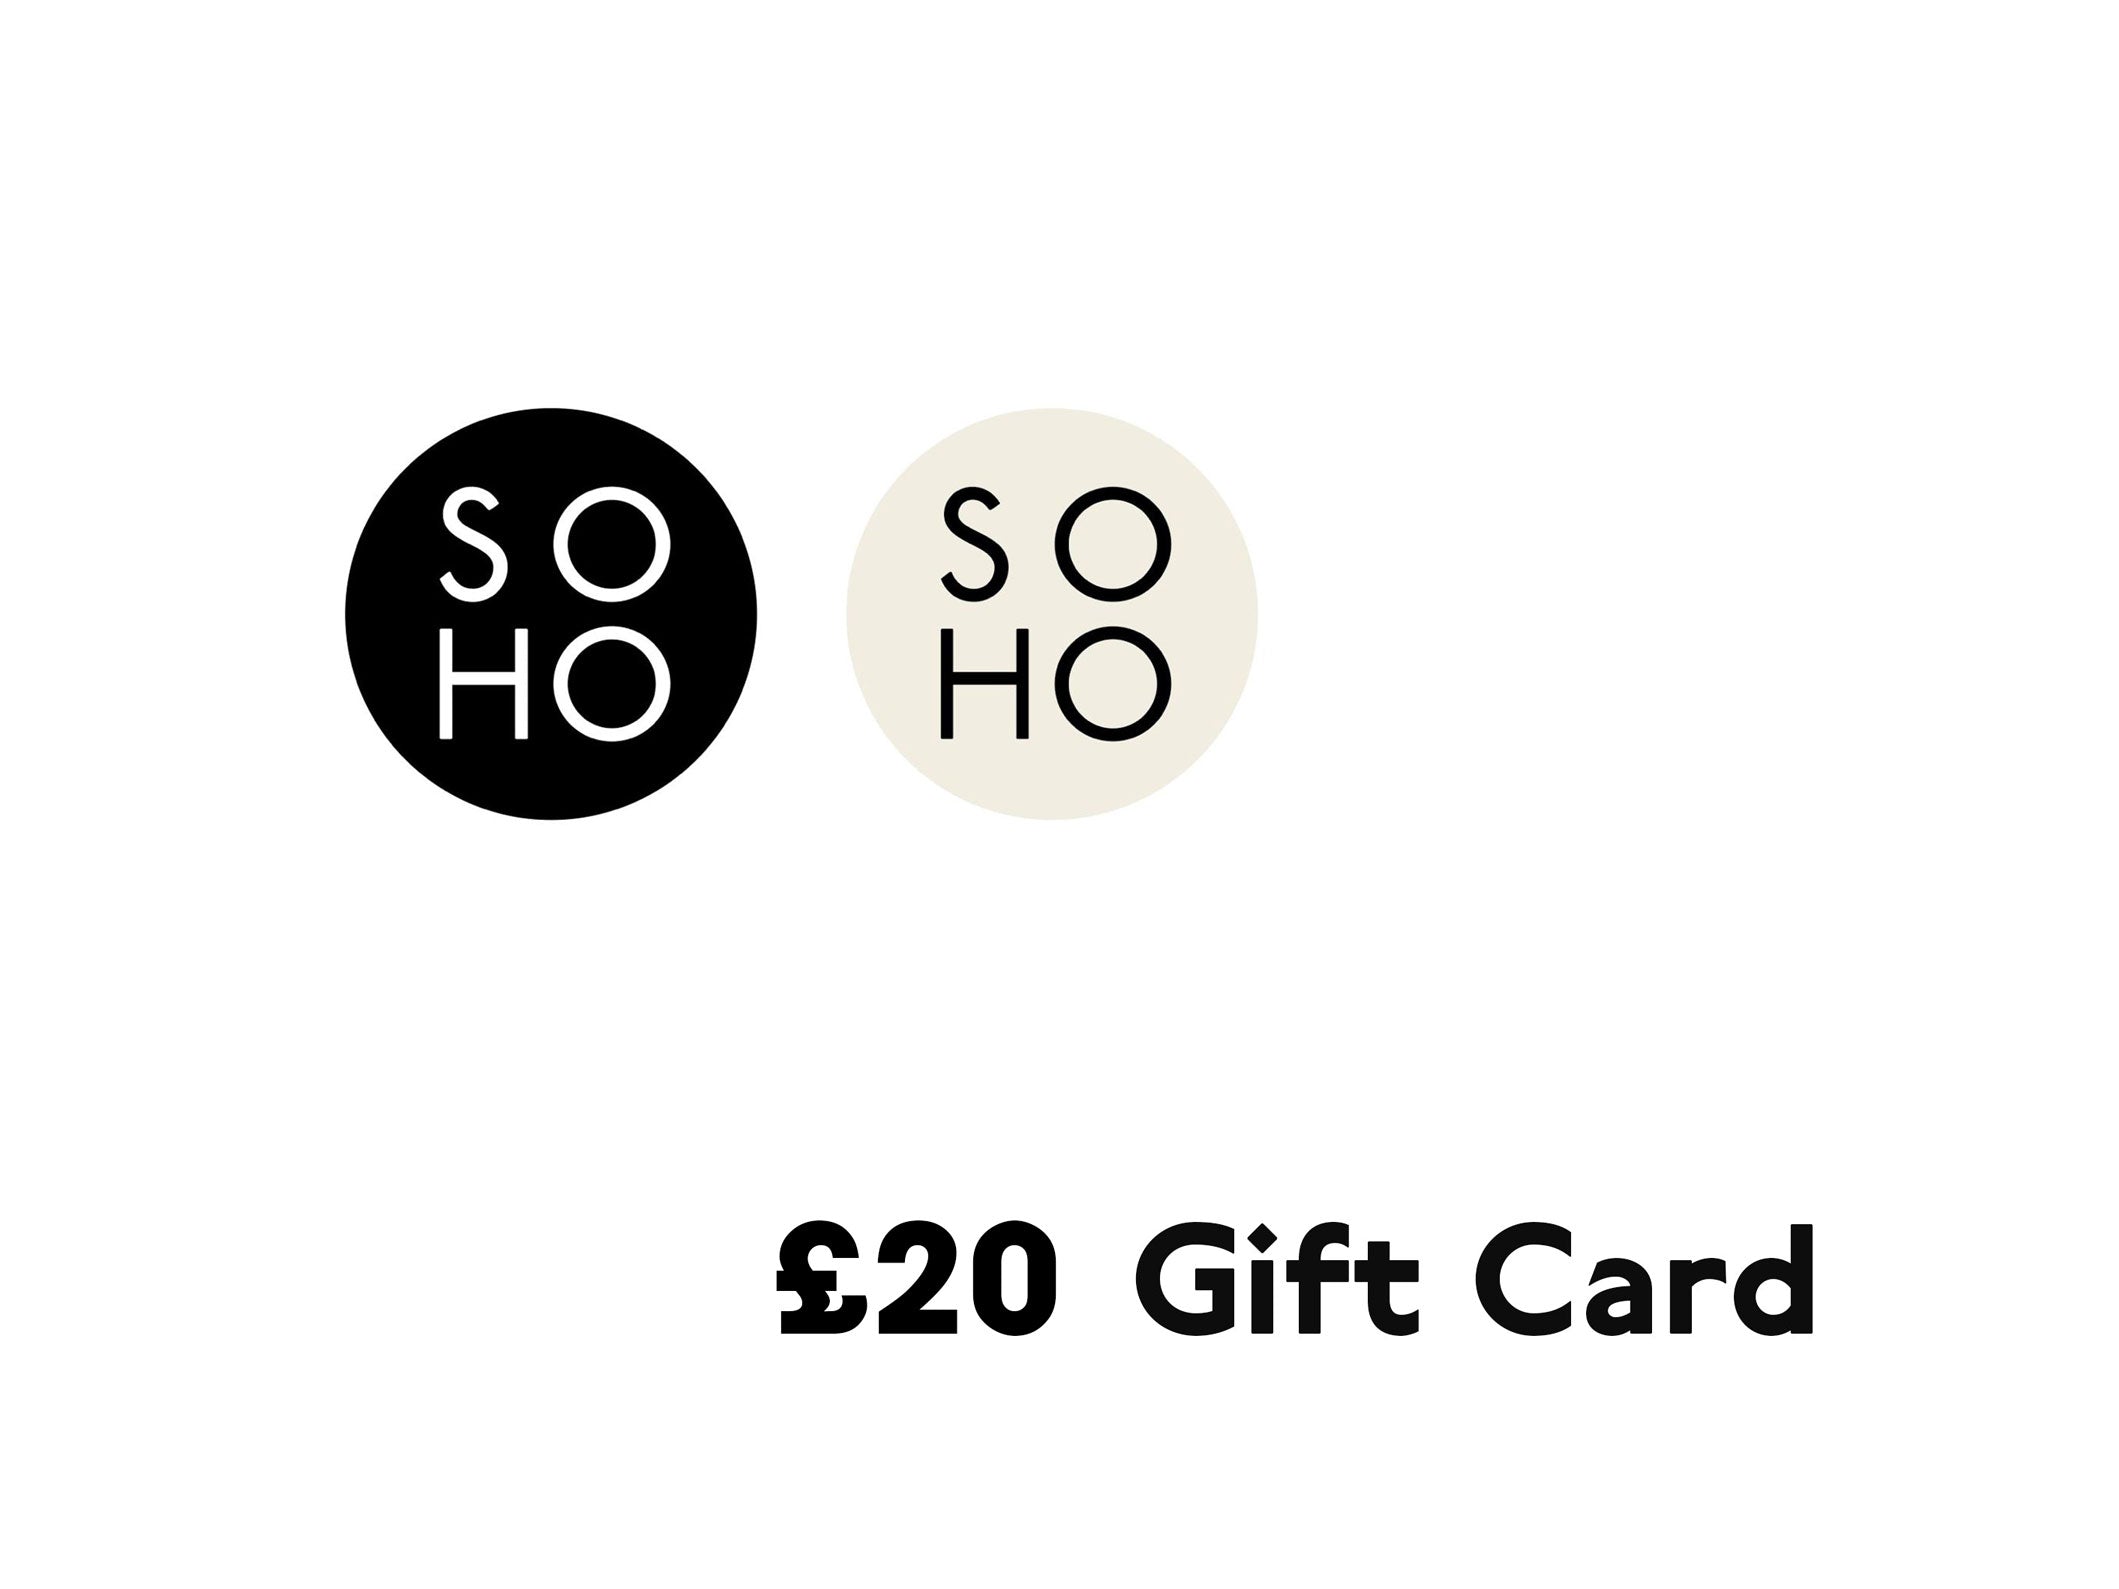 Generic graphic of SOHO Scarves gift card representing 20 GBP.